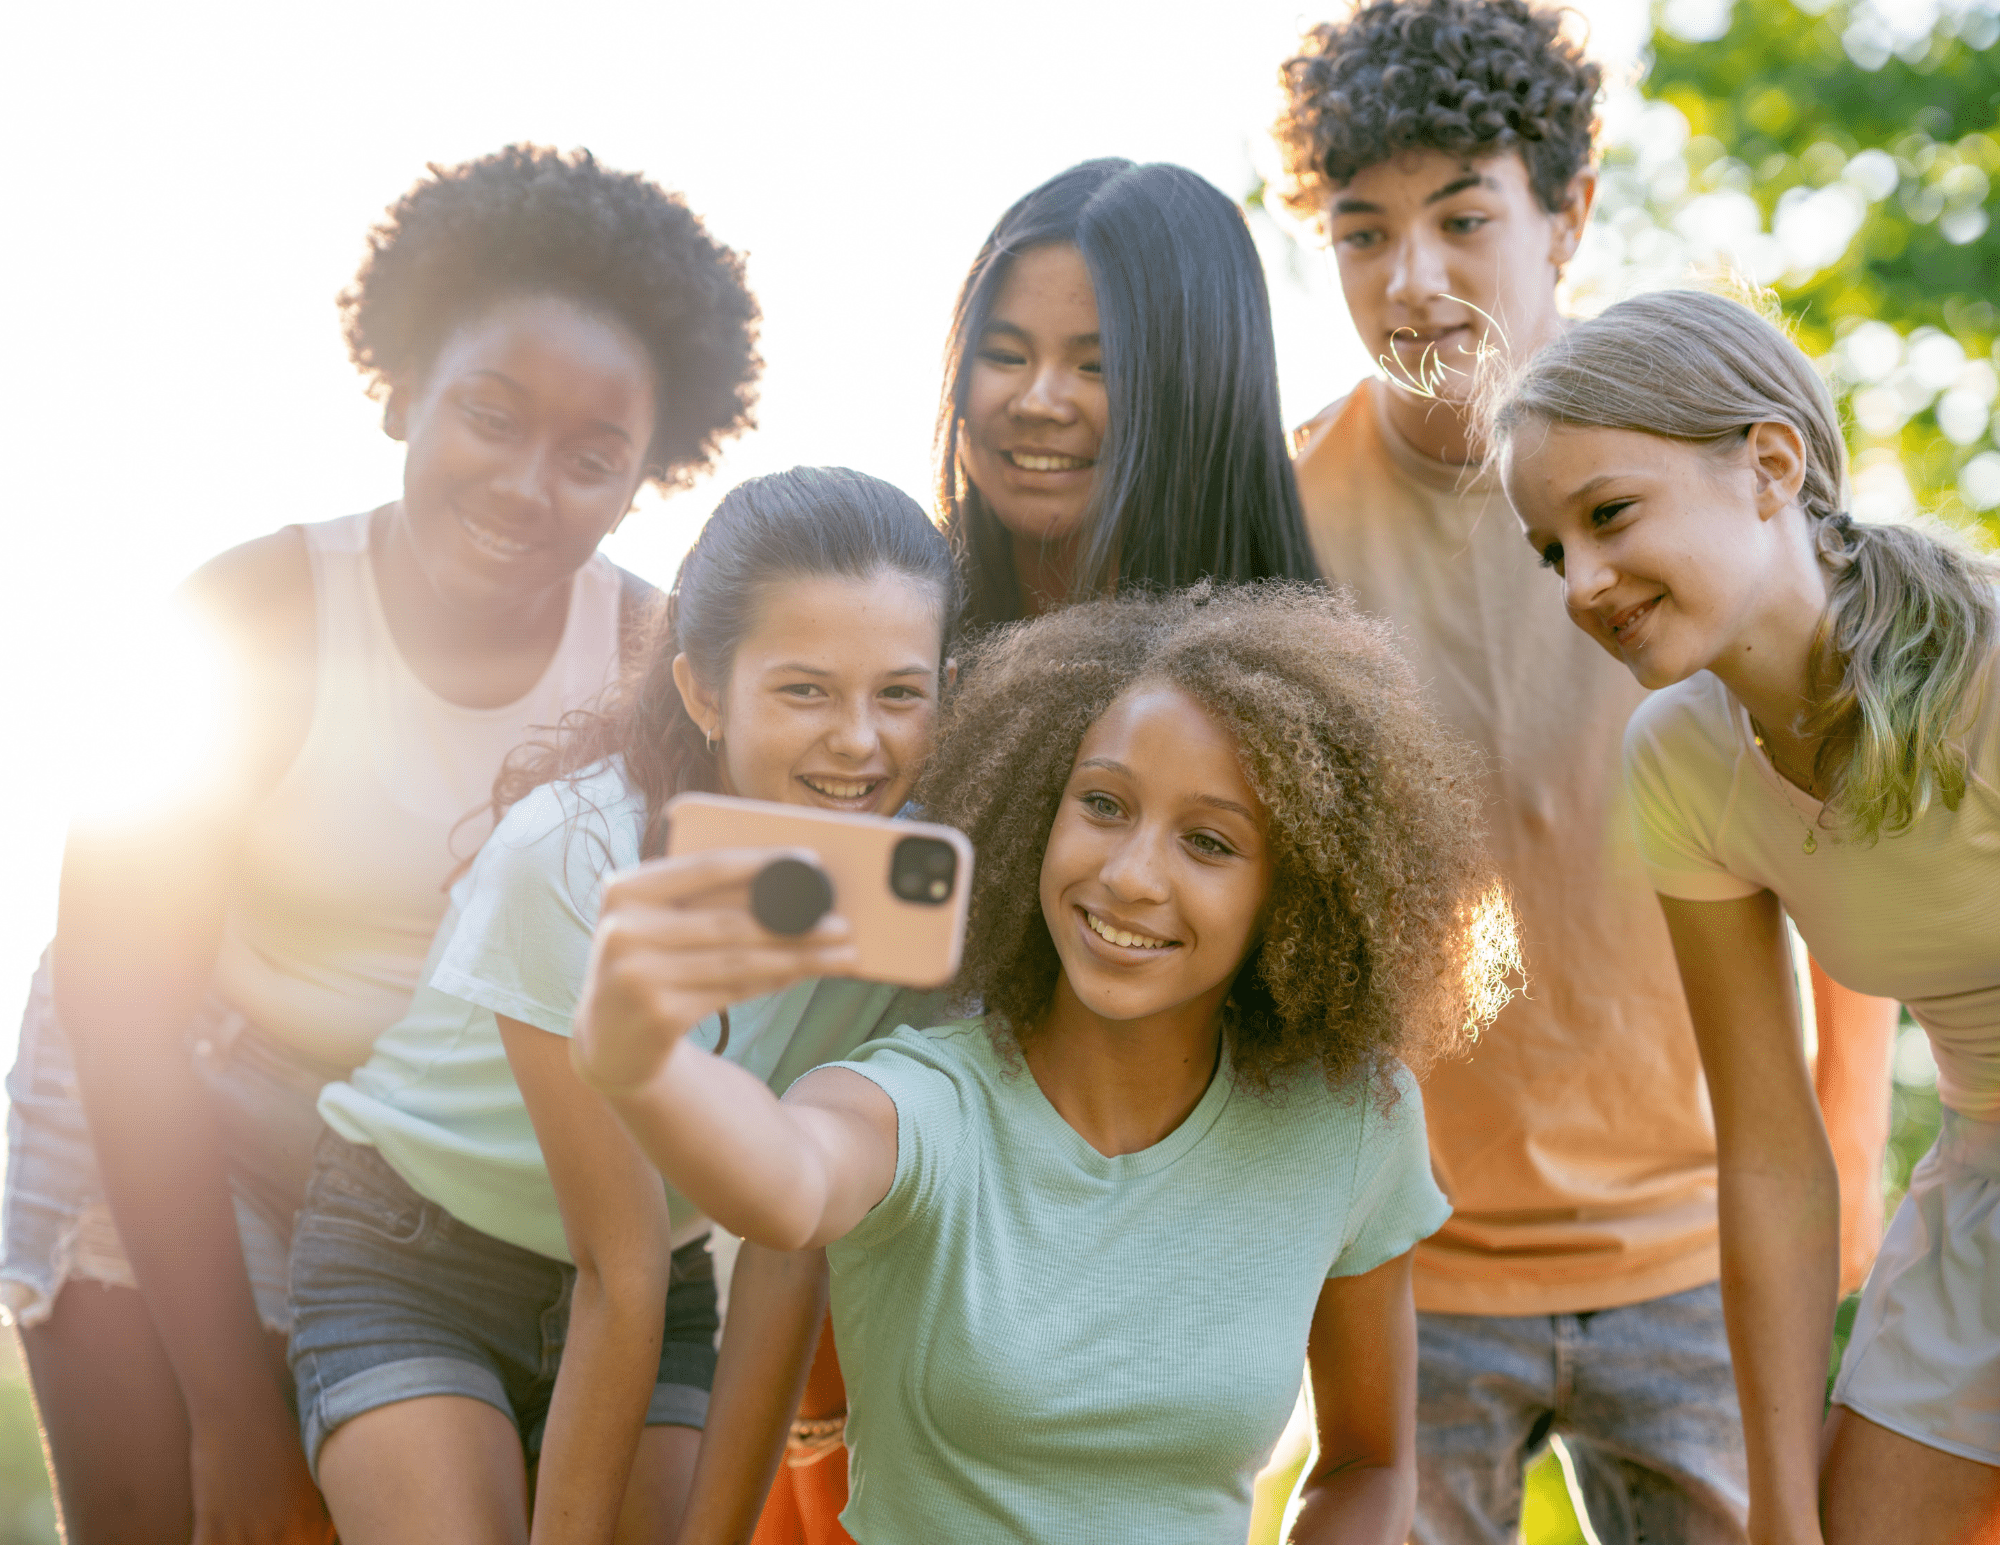 Six cheerful preteens from different backgrounds taking a selfie outside on a warm summer day.